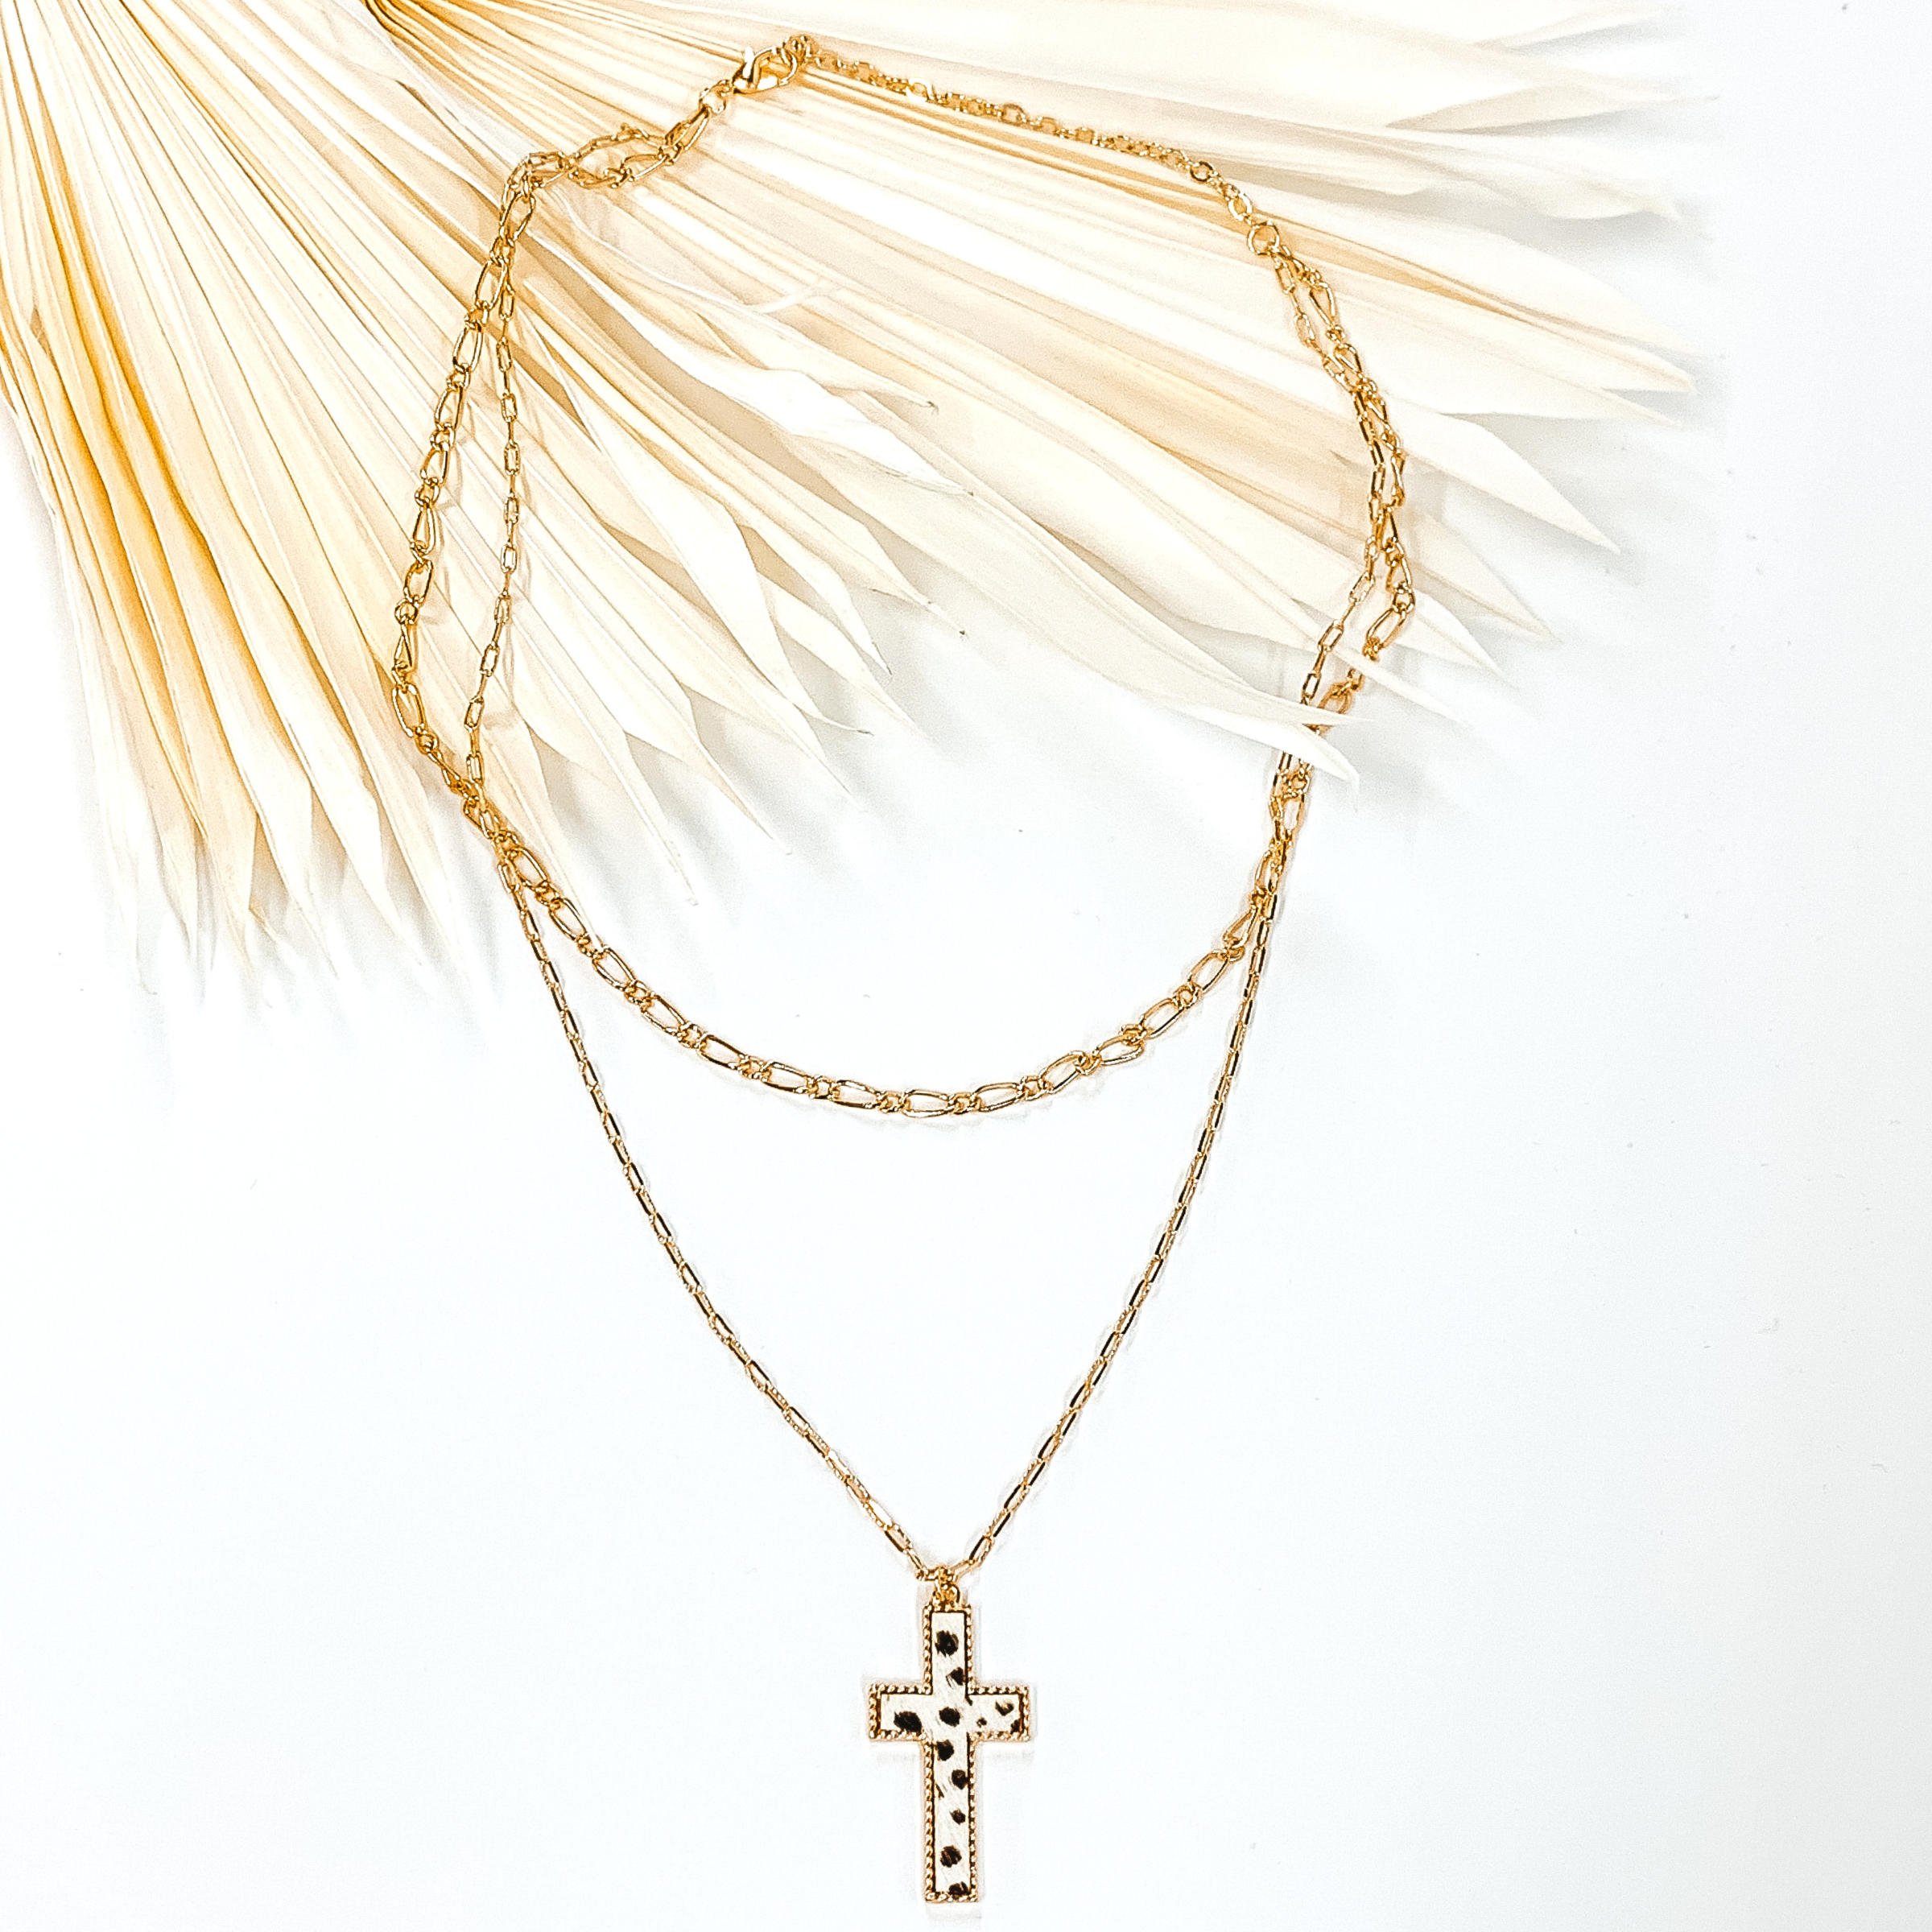 Gold paperclip doubled chain with a cross pendant. The pendant has a white hide inlay with a dotted print. This necklace is pictured laying on cream leaf on a white background.